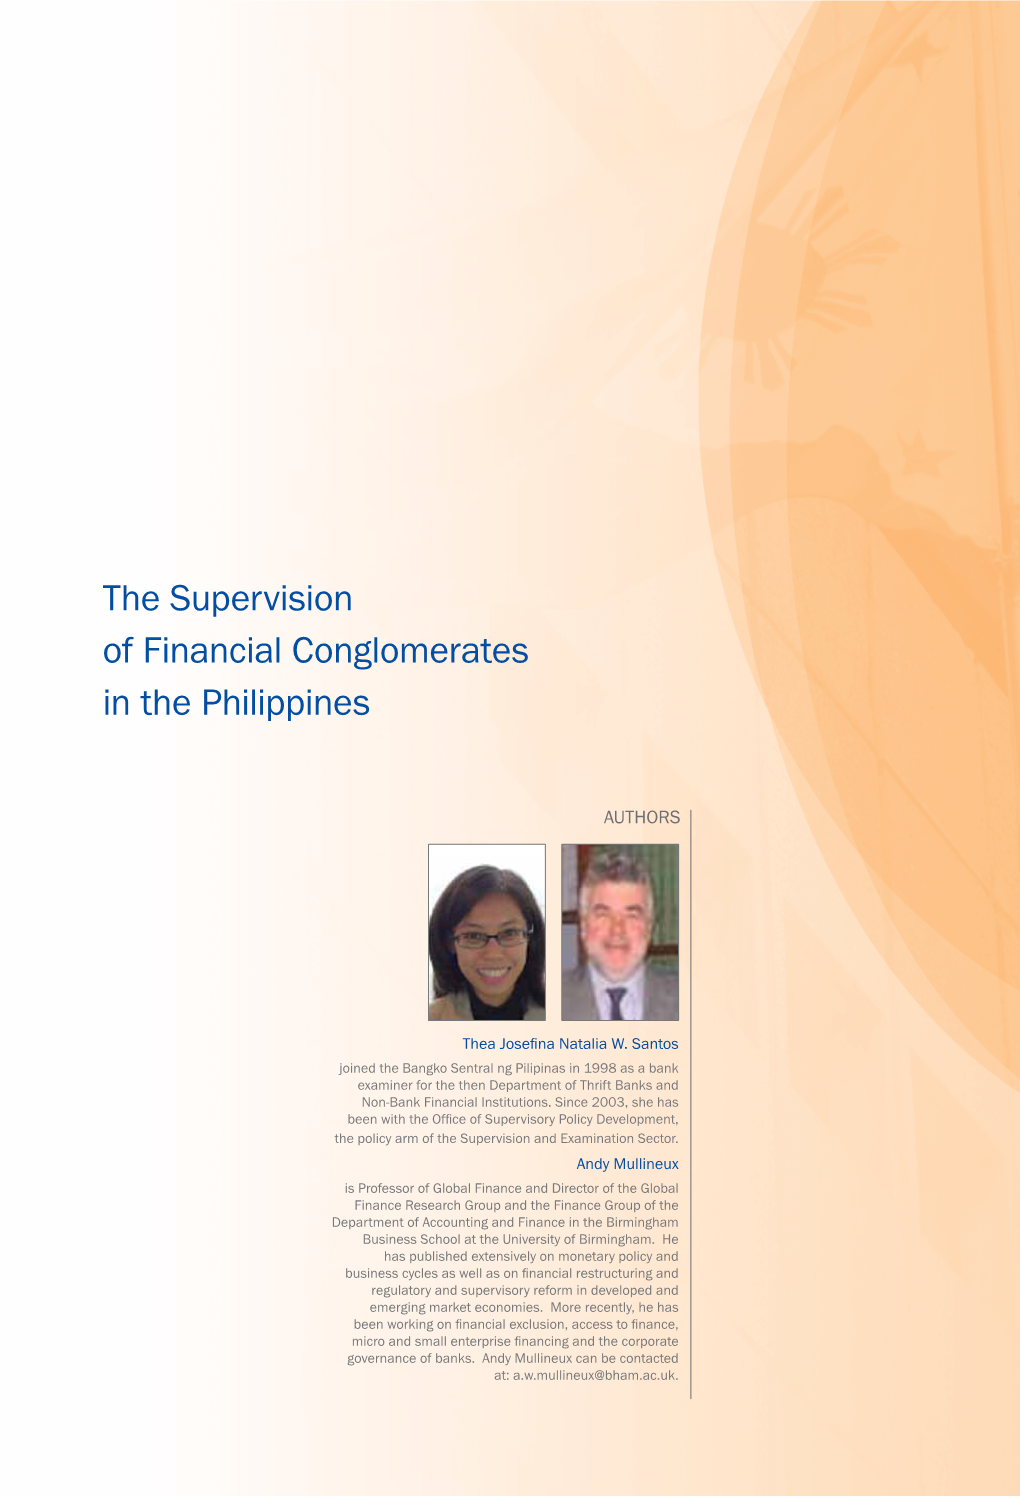 The Supervision of Financial Conglomerates in the Philippines